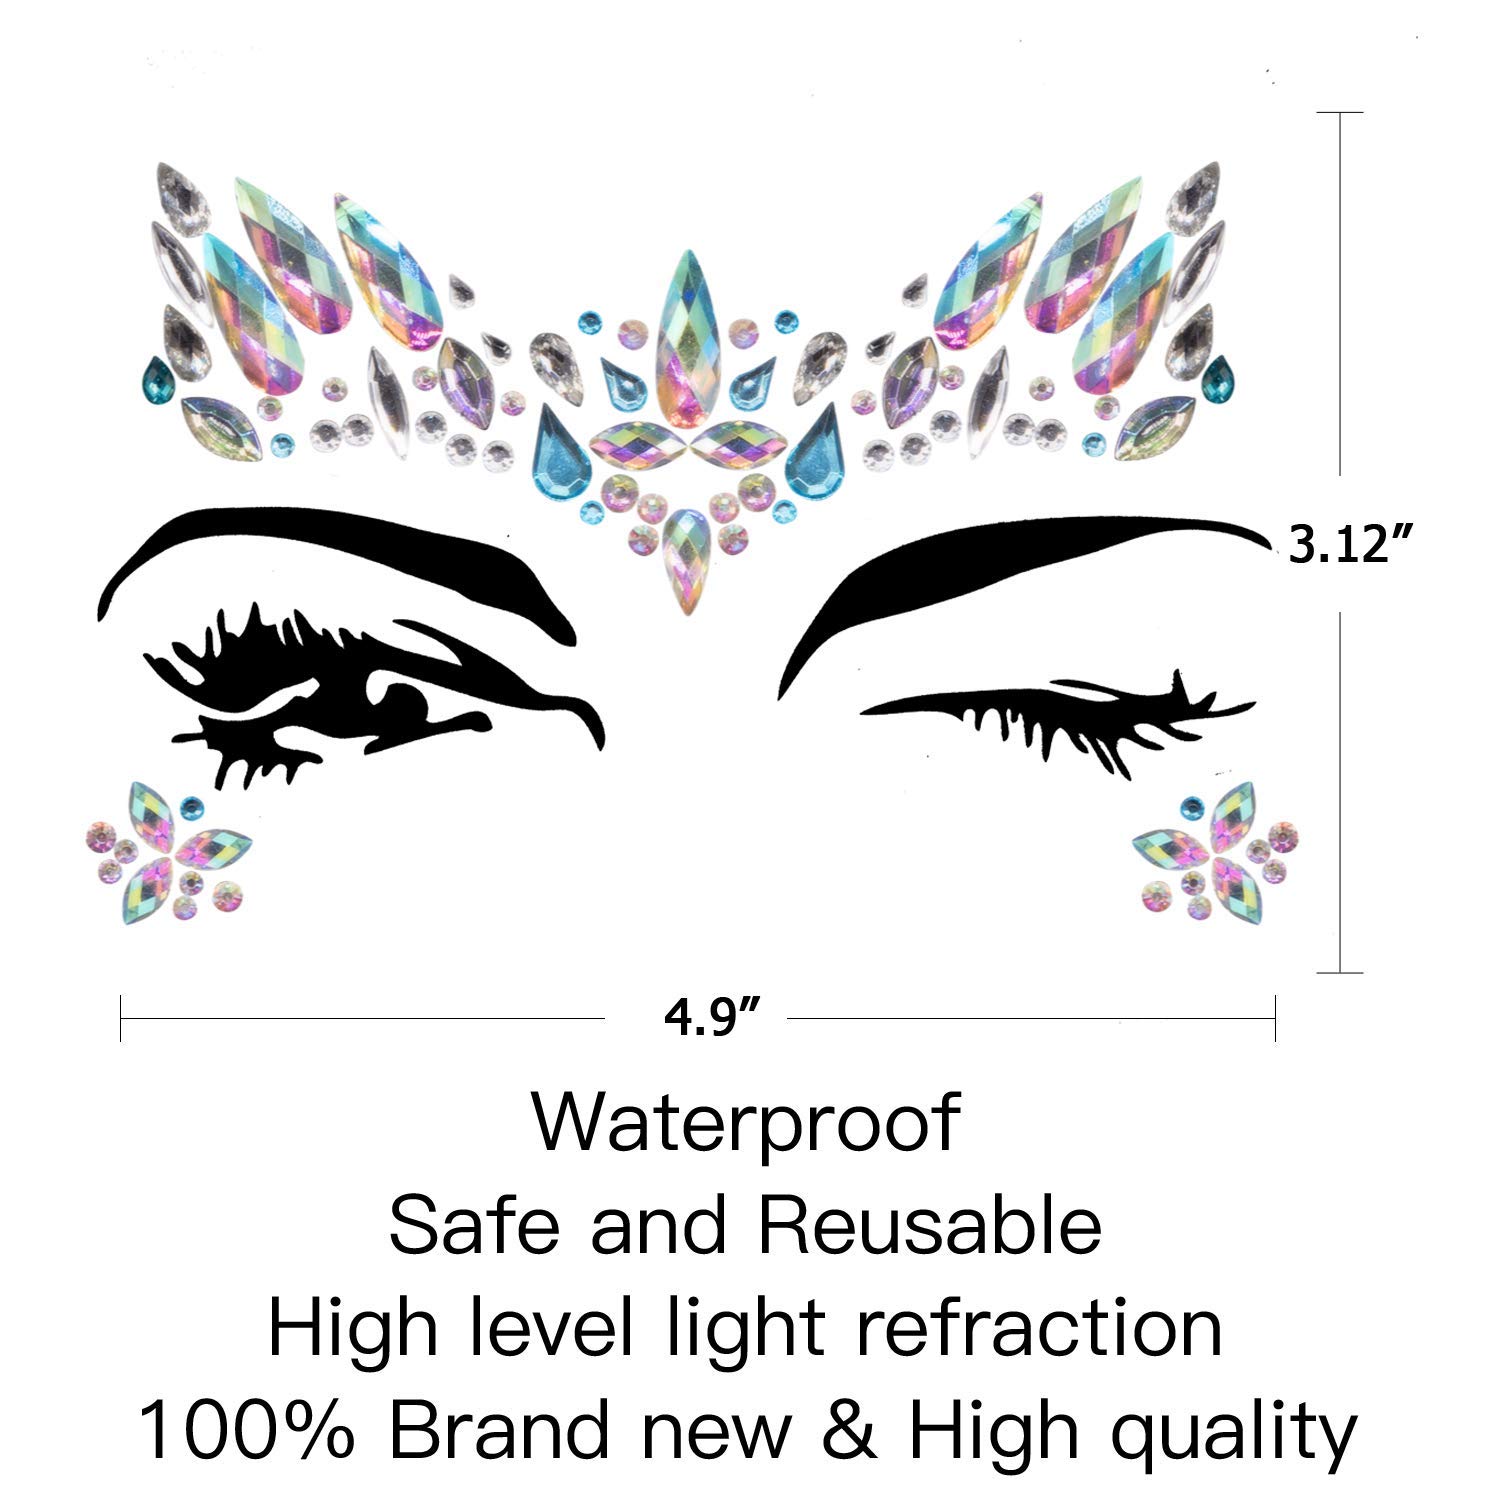 Face Gems, 10 Sets Mermaid Face Jewels Festival Face Gems Rhinestones Rave Eyes Body Bindi Temporary Stickers Crystal Face Stickers Decorations Fit for Festival Party（10 Sets collection）